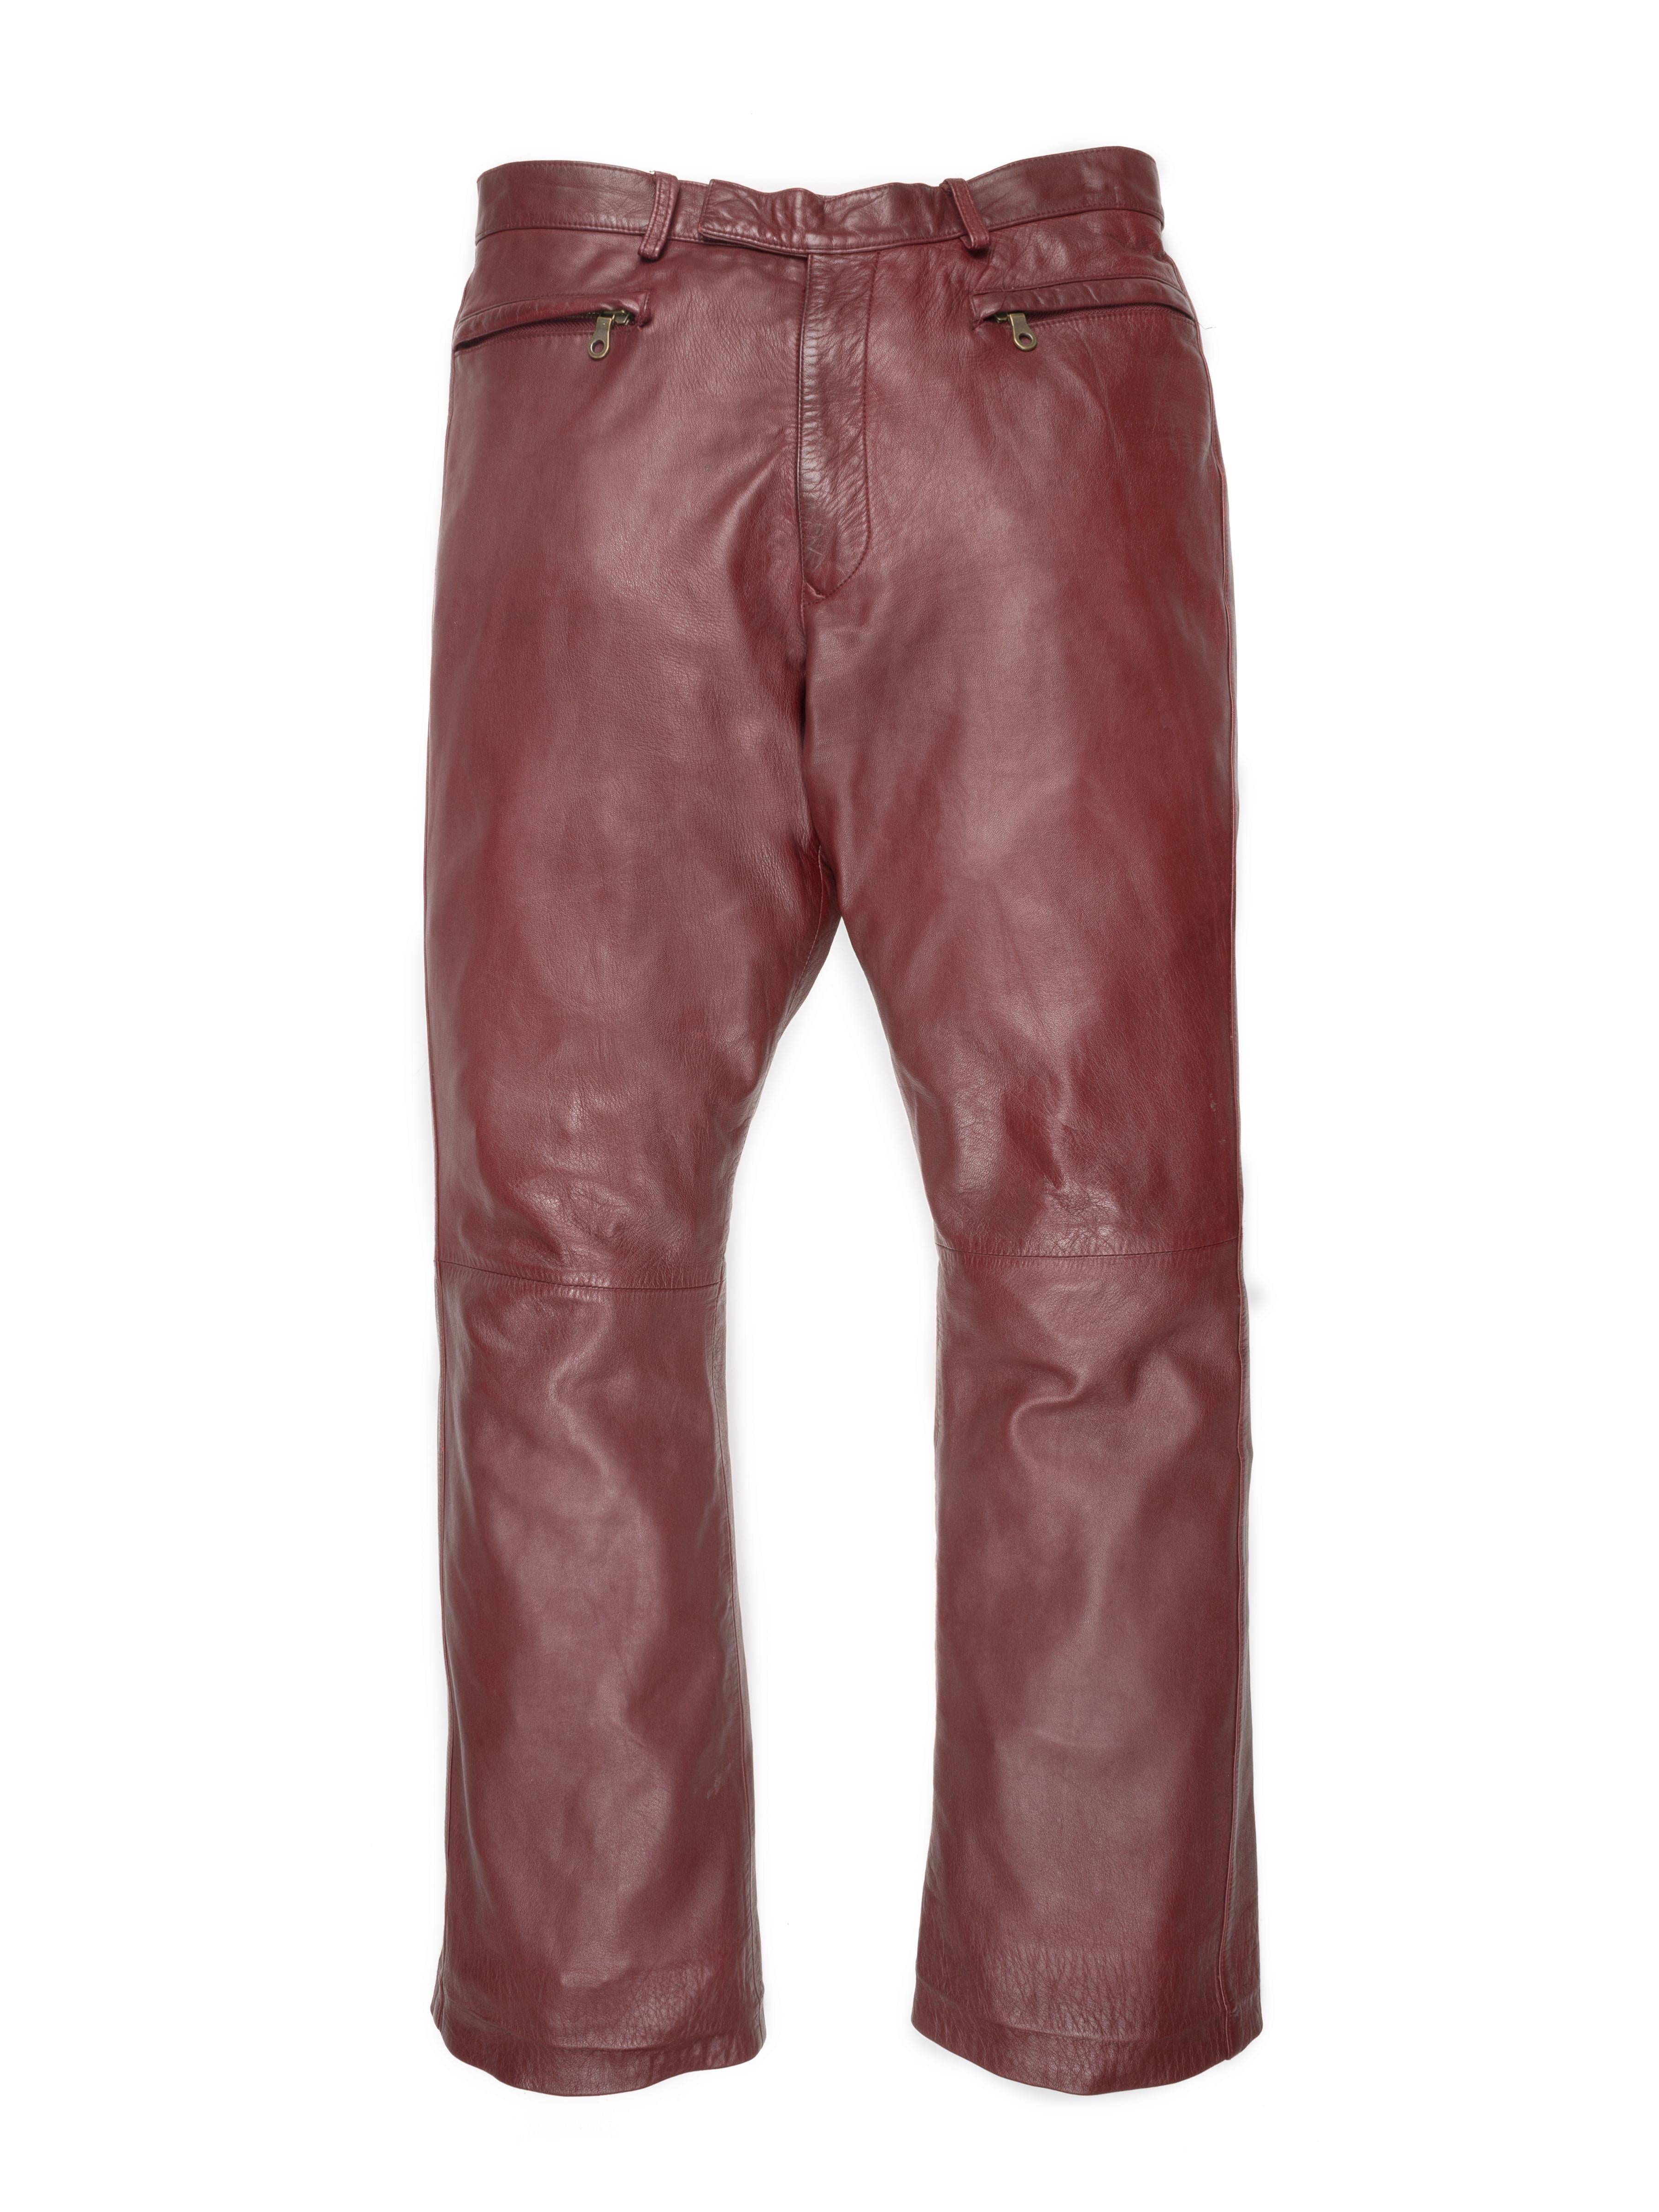 mens red leather pants